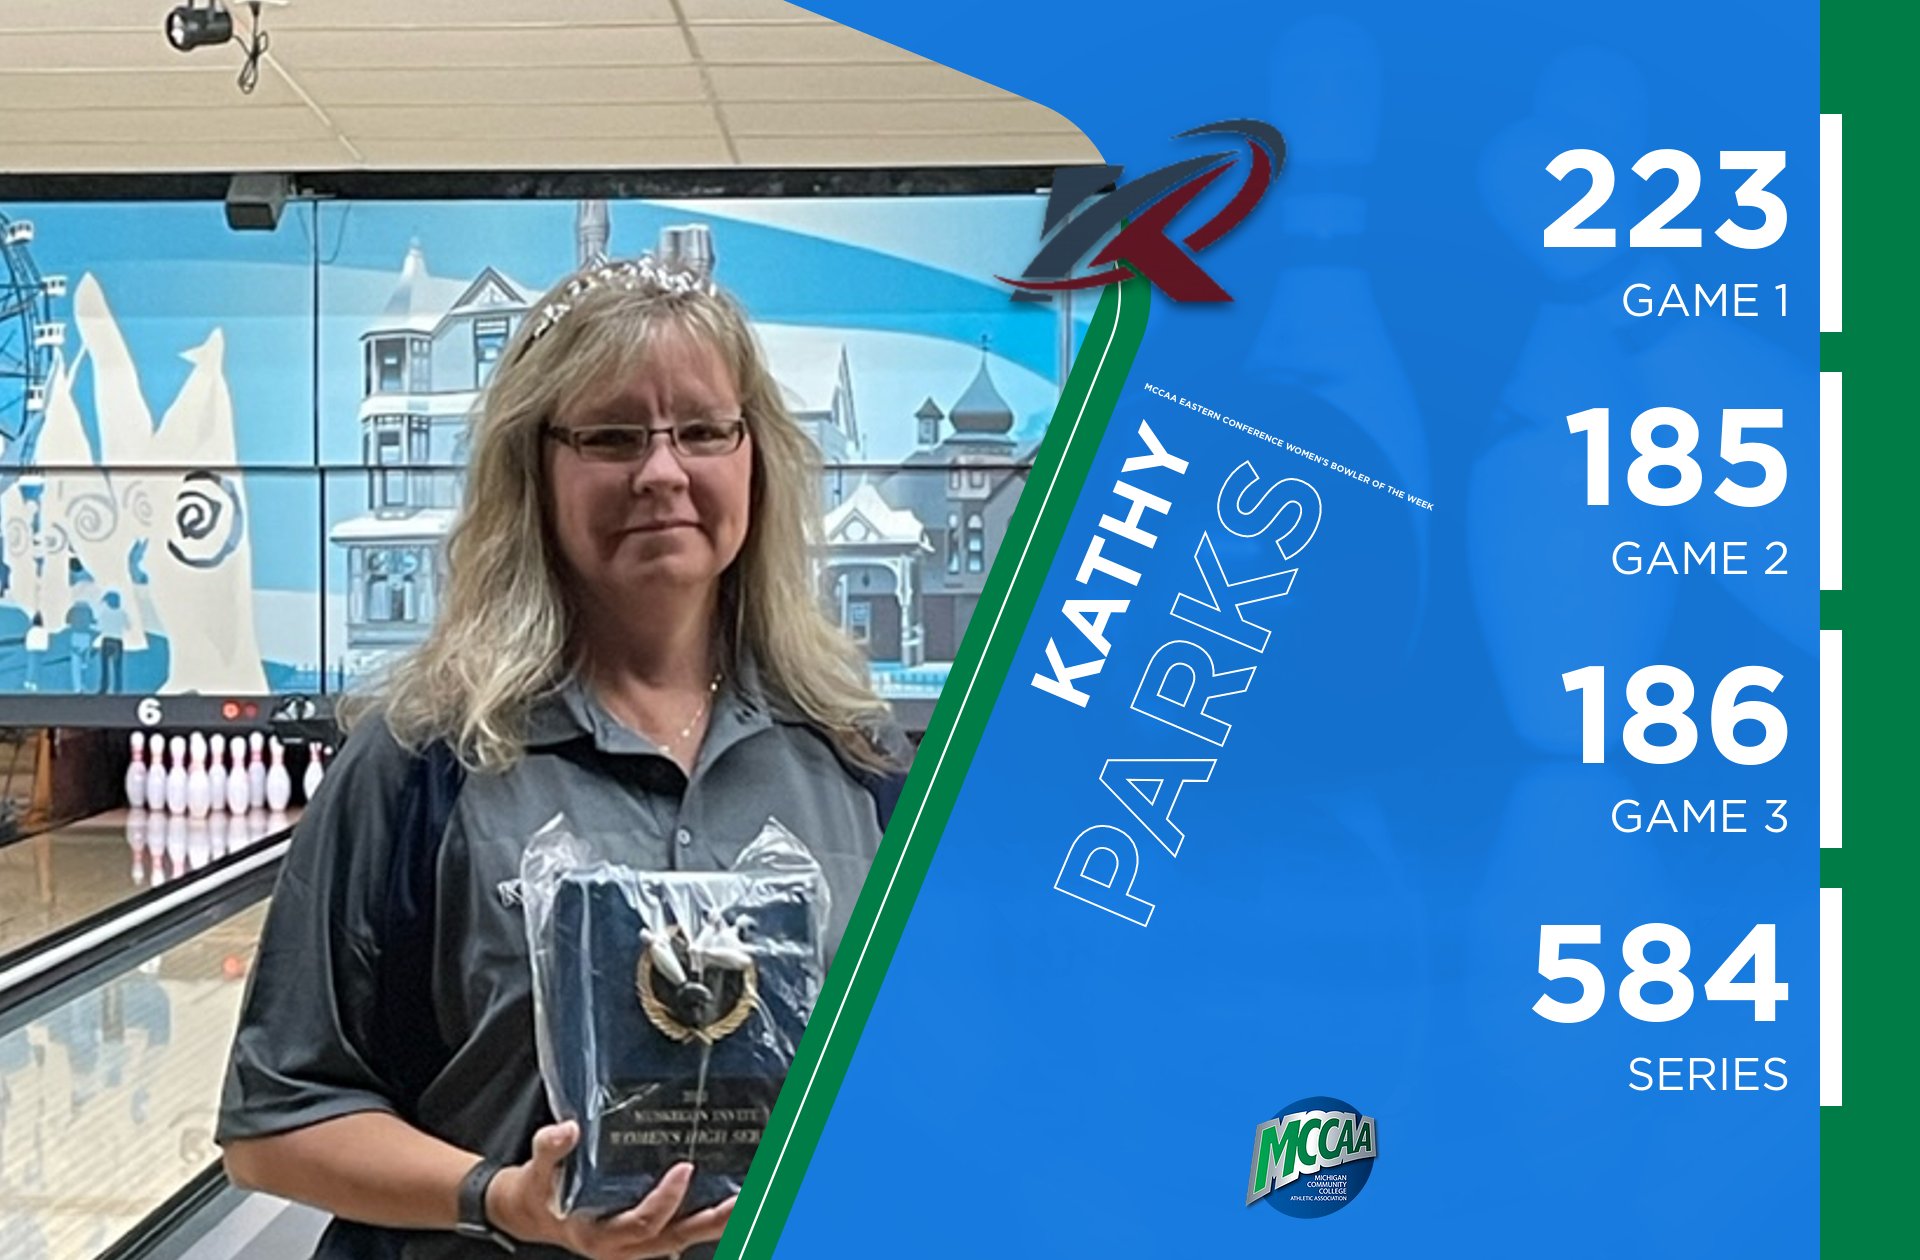 Kathy Parks, MCCAA Eastern Conference Women's Bowler of the Week, Kirtland CC